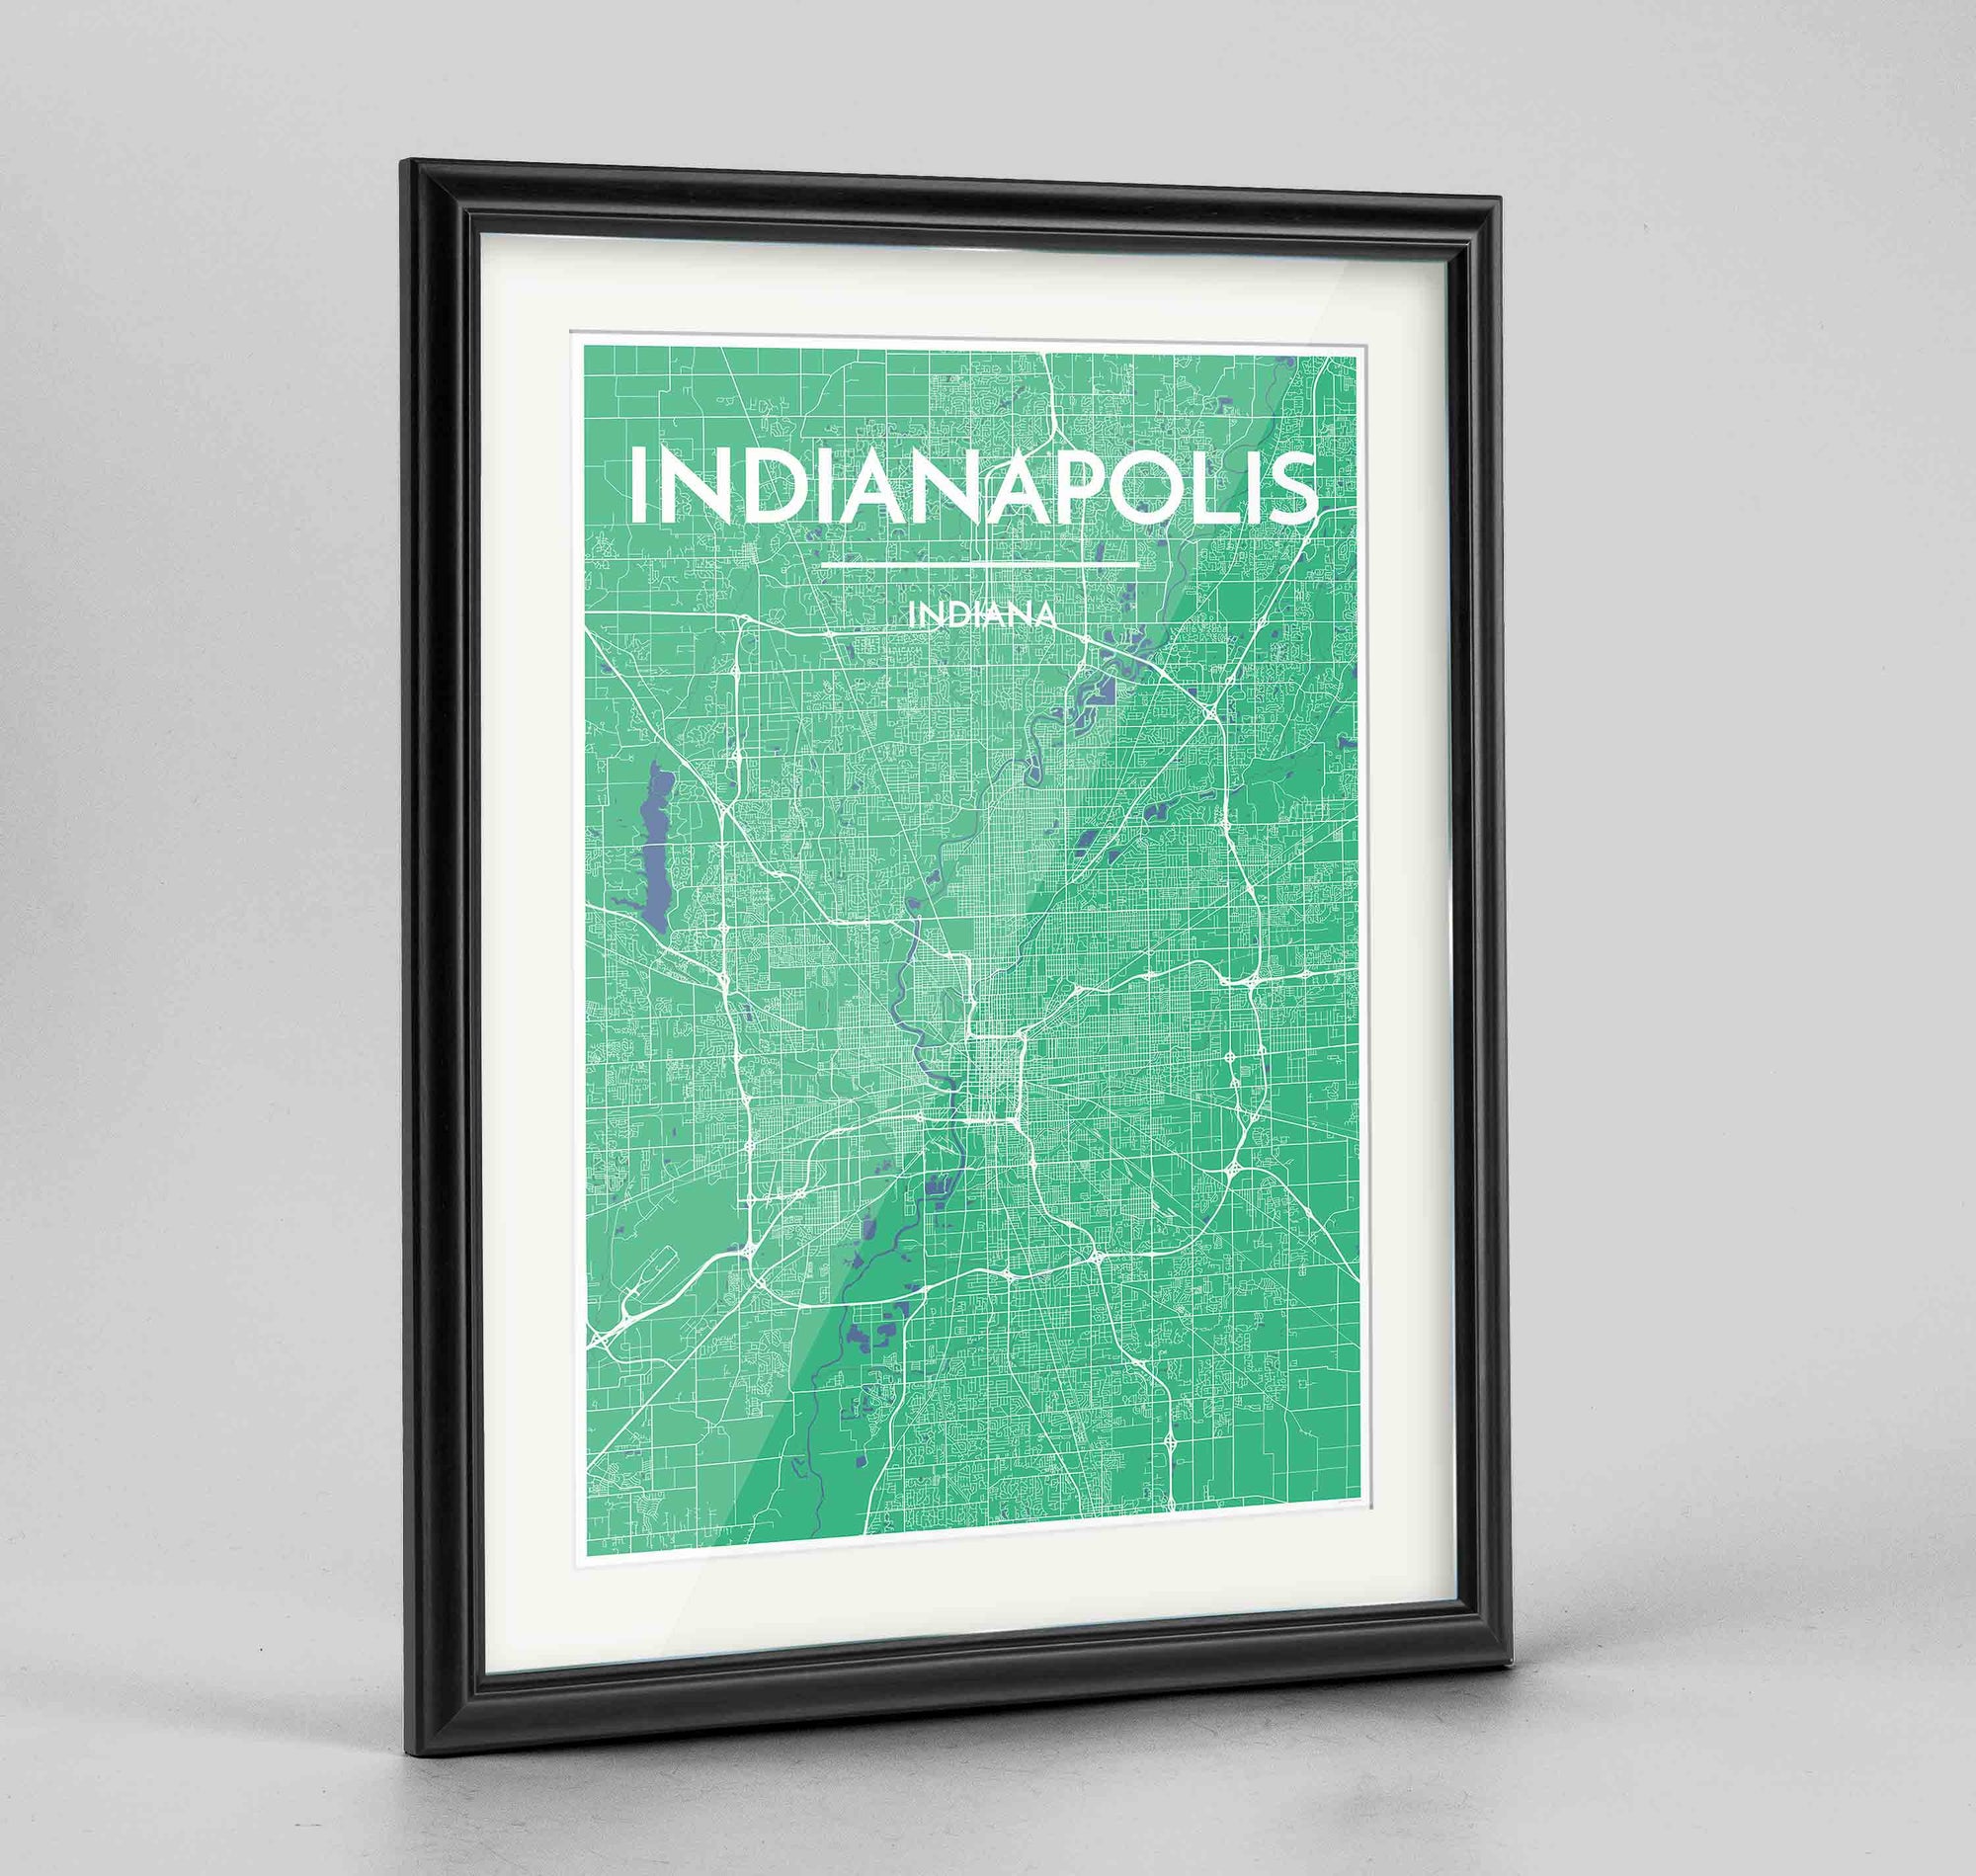 Framed Indianapolis Map Art Print 24x36" Traditional Black frame Point Two Design Group